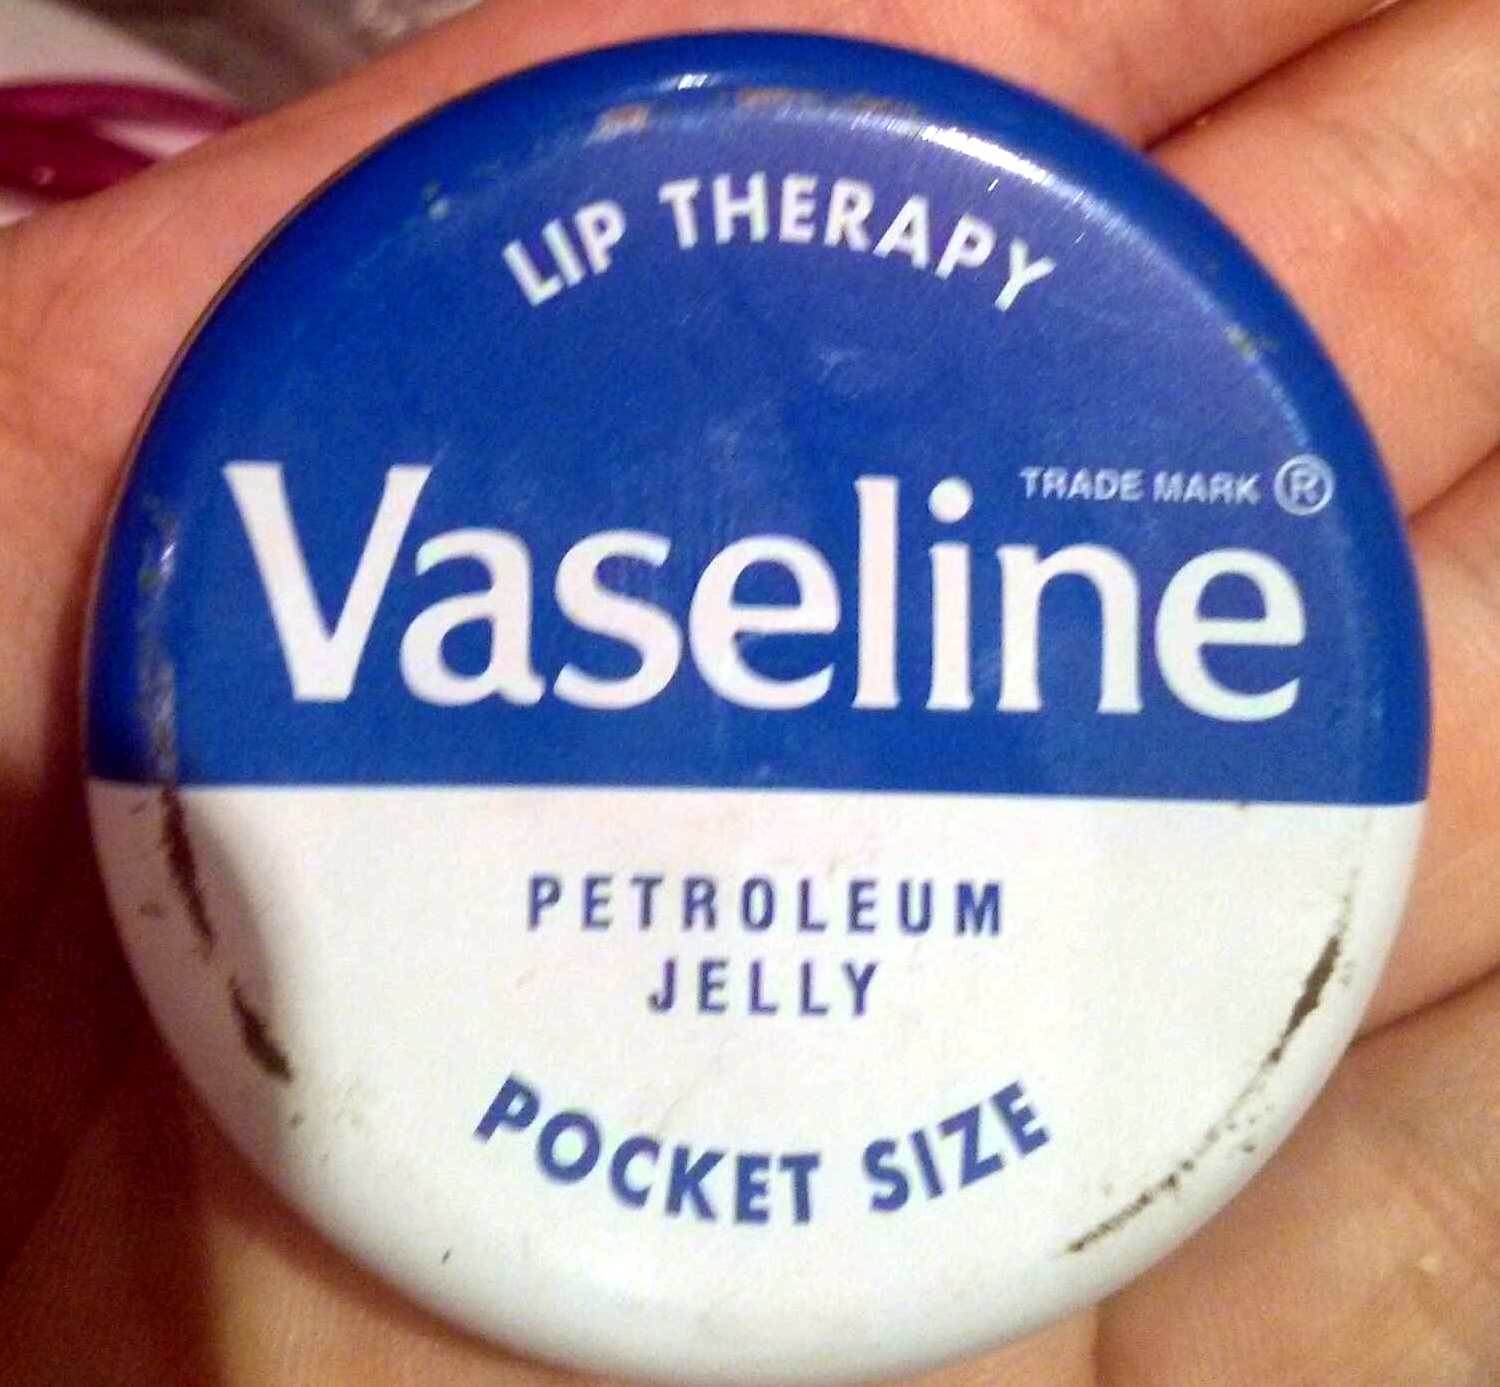 Lip therapy petroleum jelly pocket size - Product - en